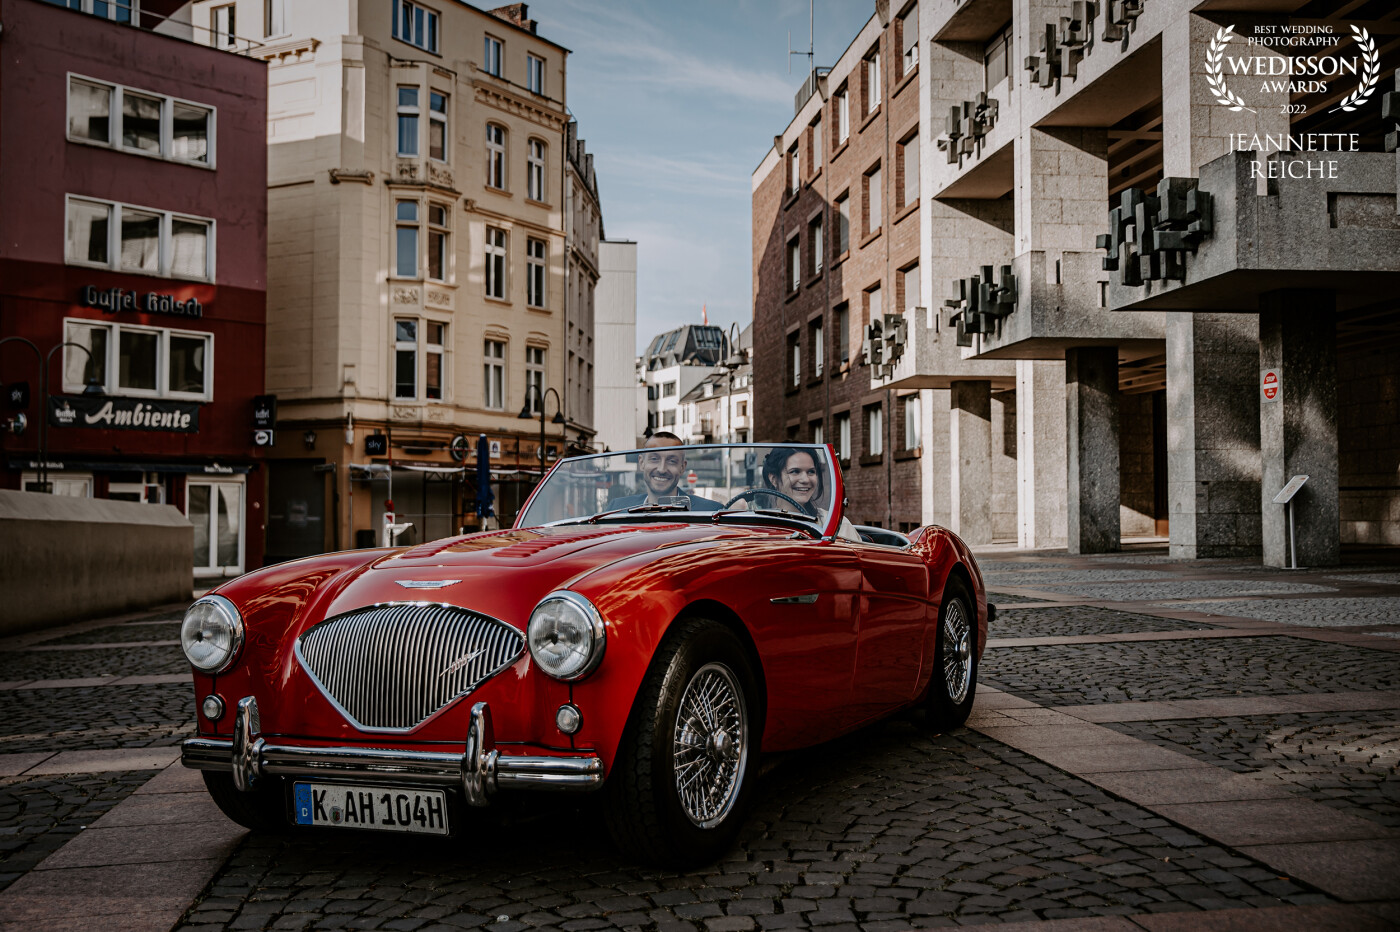 The bridal couple on their way to their wedding in the red Austin Healey. They happily reach the registry office and I was able to capture this unplanned snapshot.